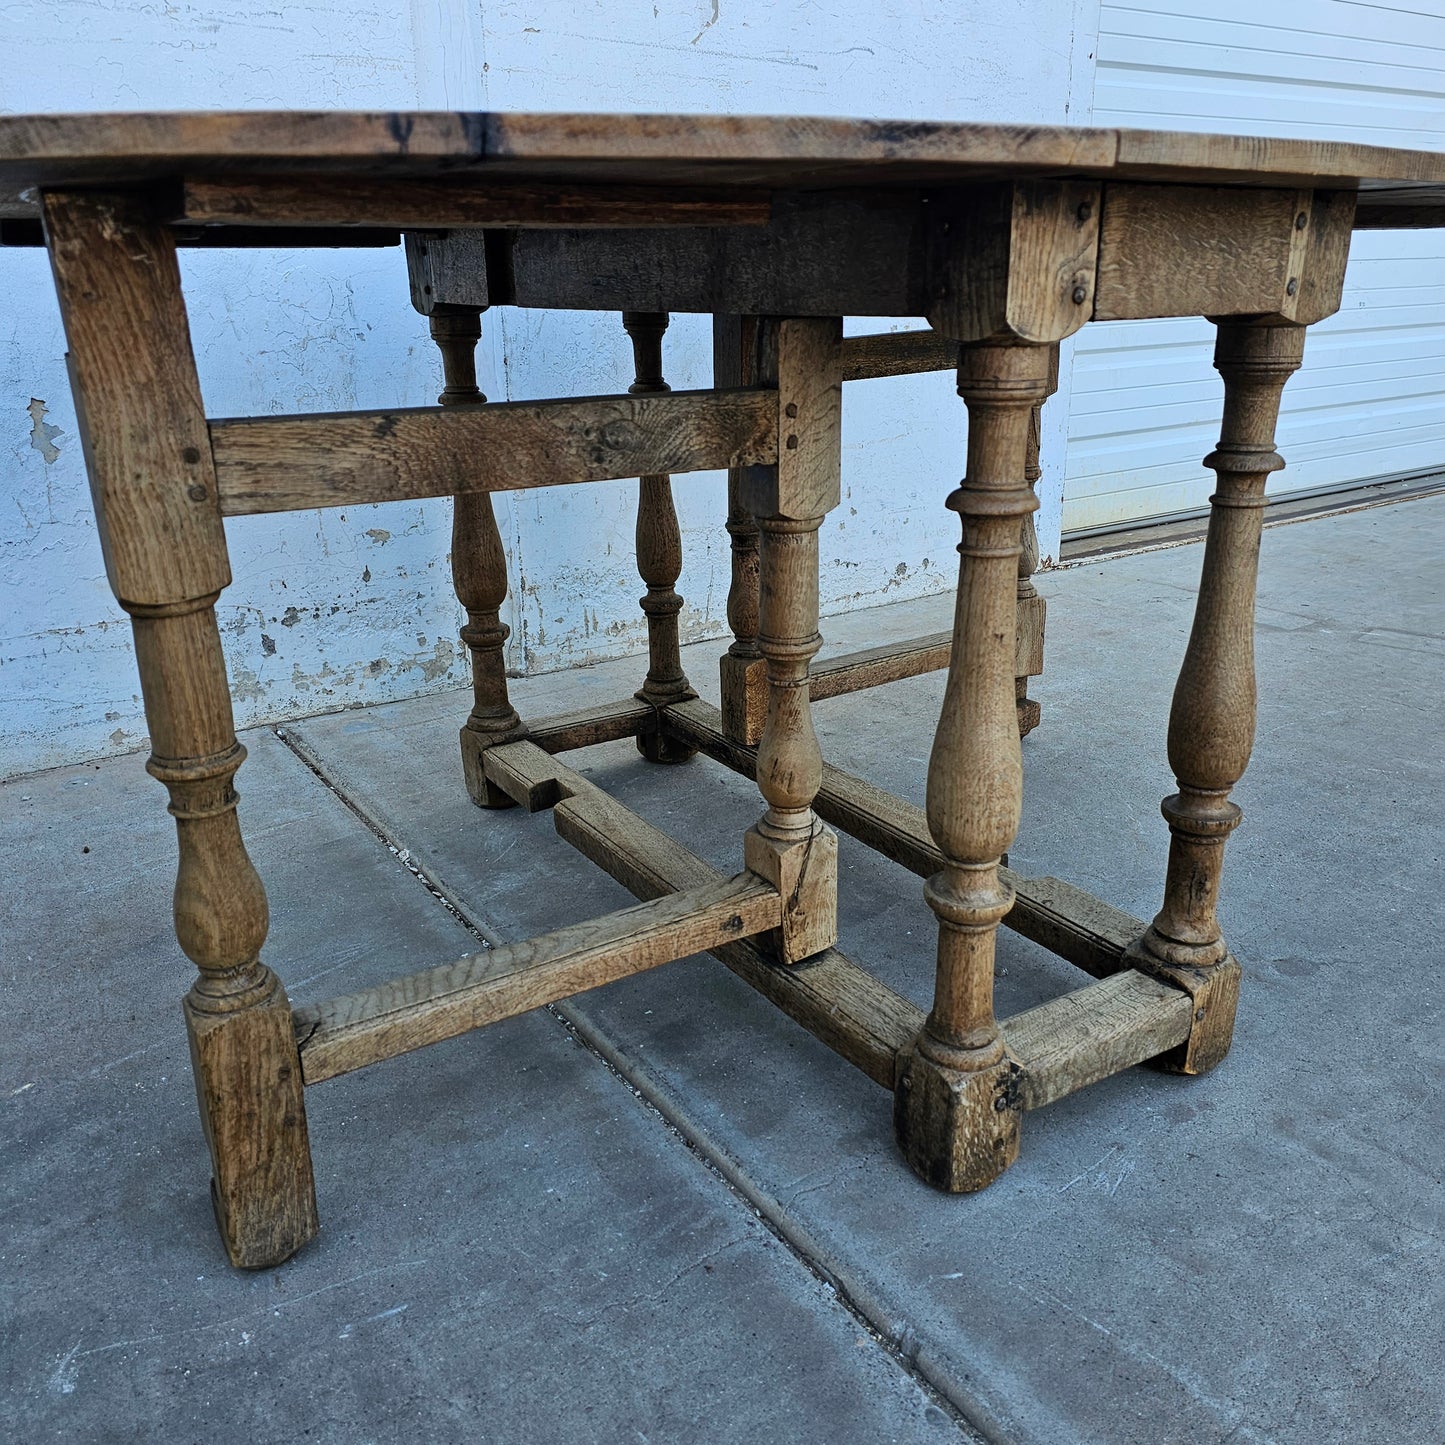 Drop Leaf Oval Dining Table